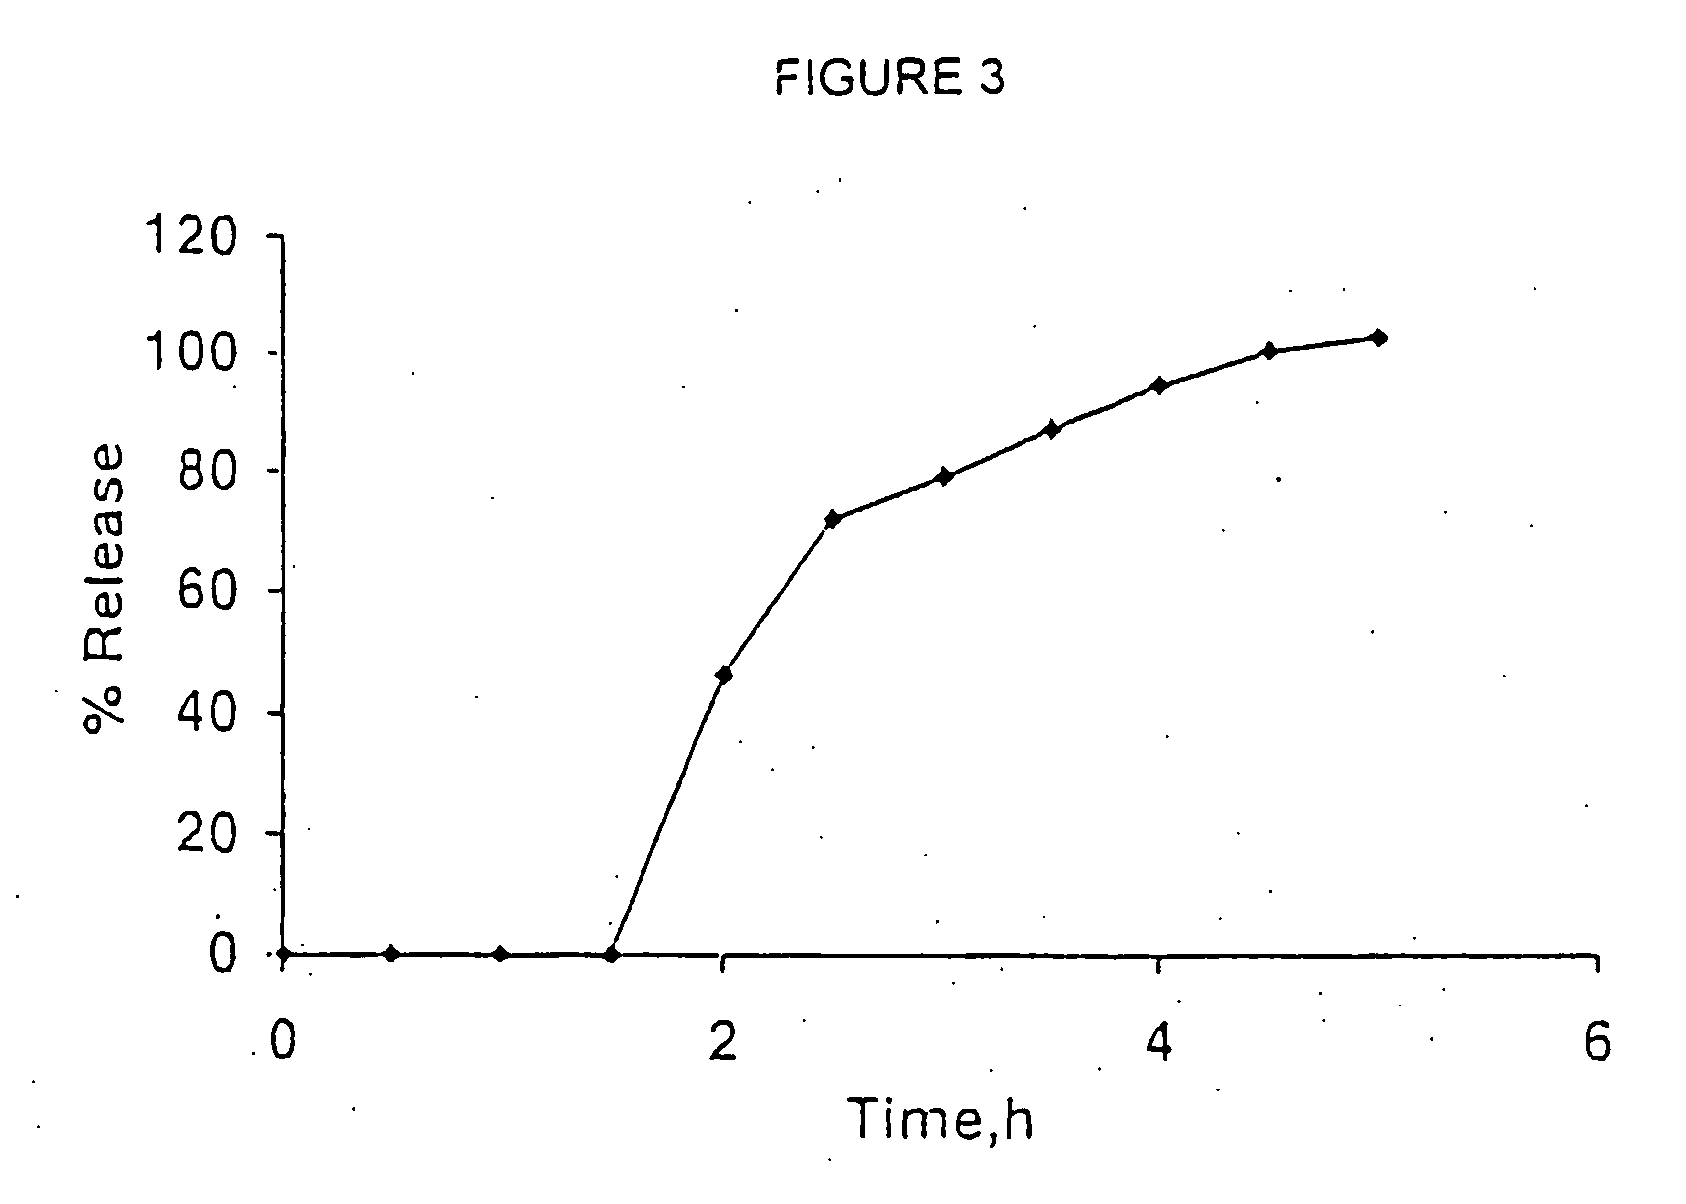 Pharmaceutical compositions containing venlafaxine